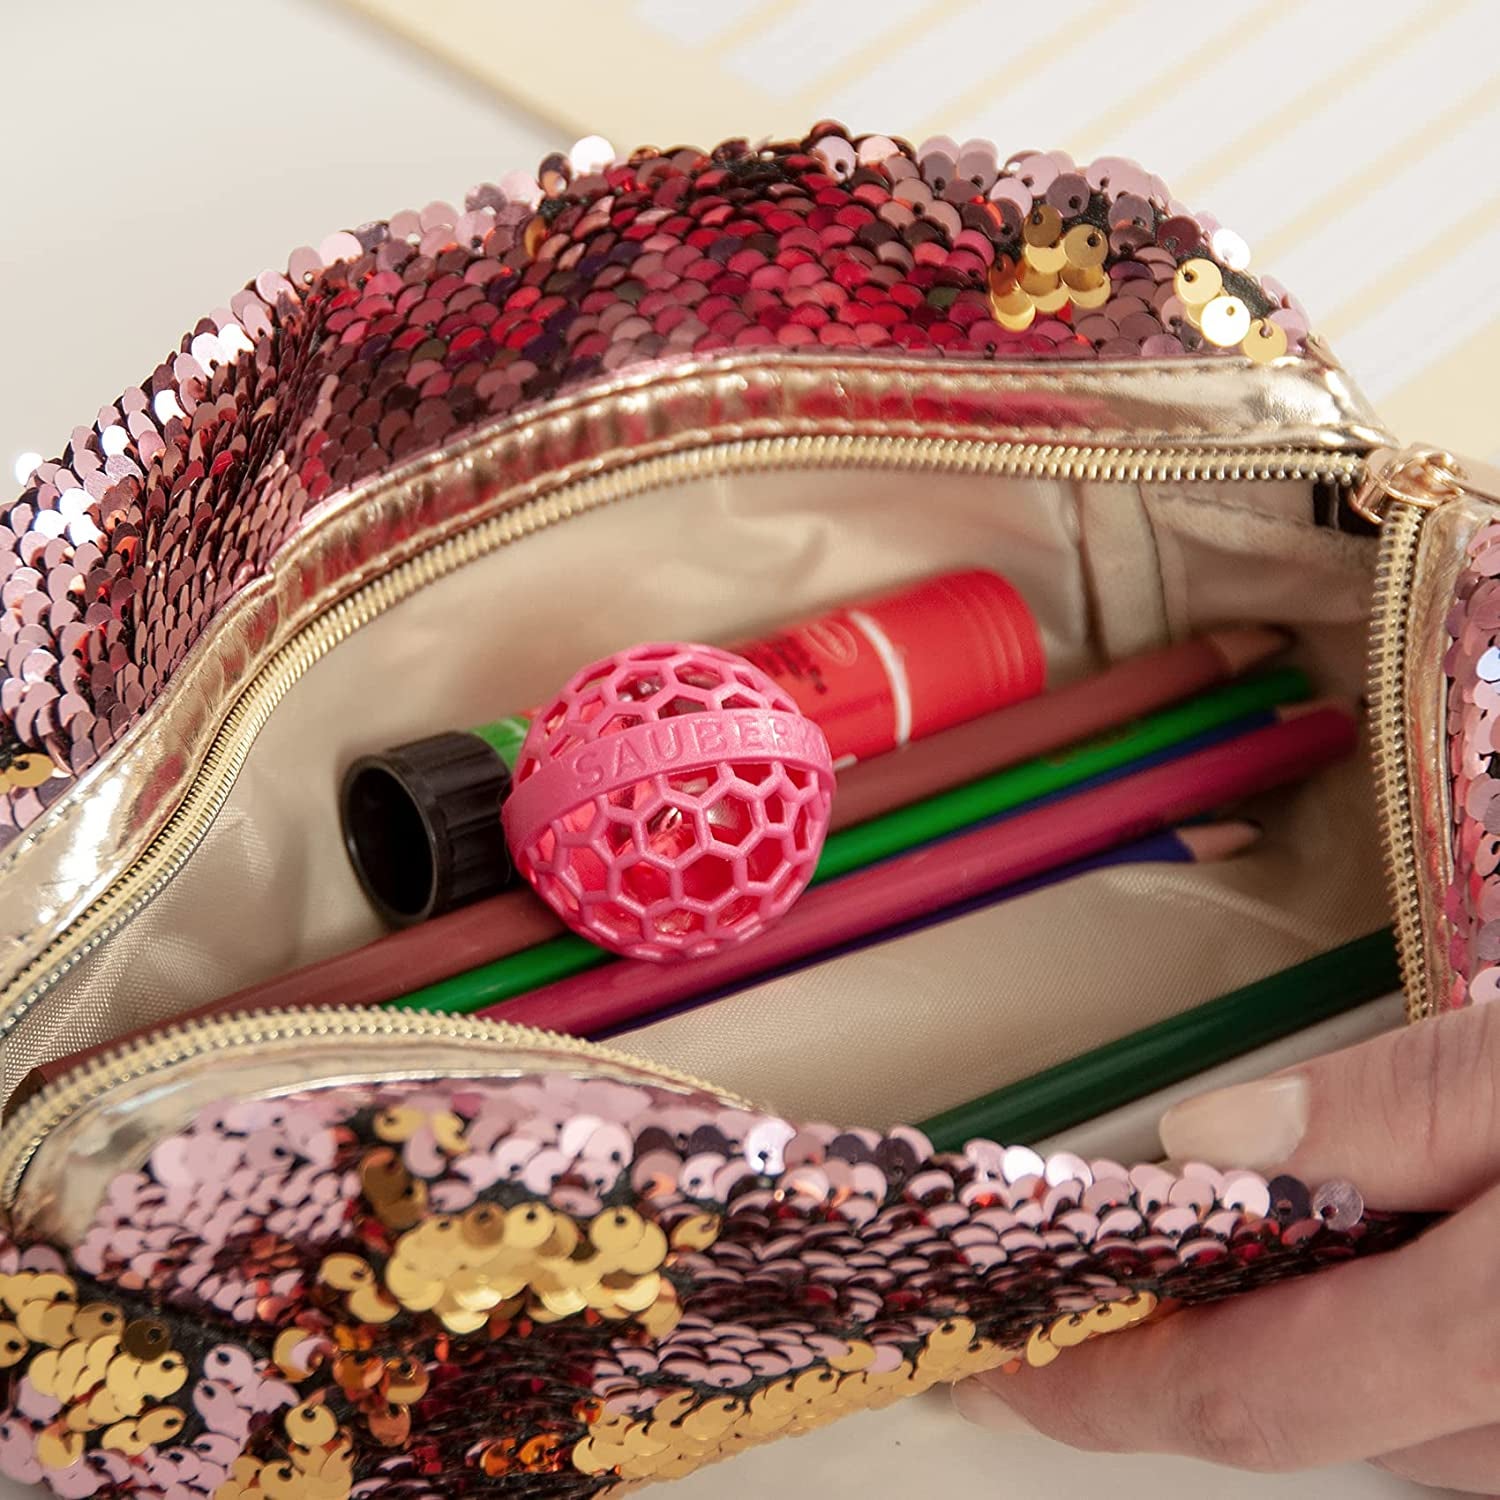 Top 10 Things to ALWAYS Have in Your Purse